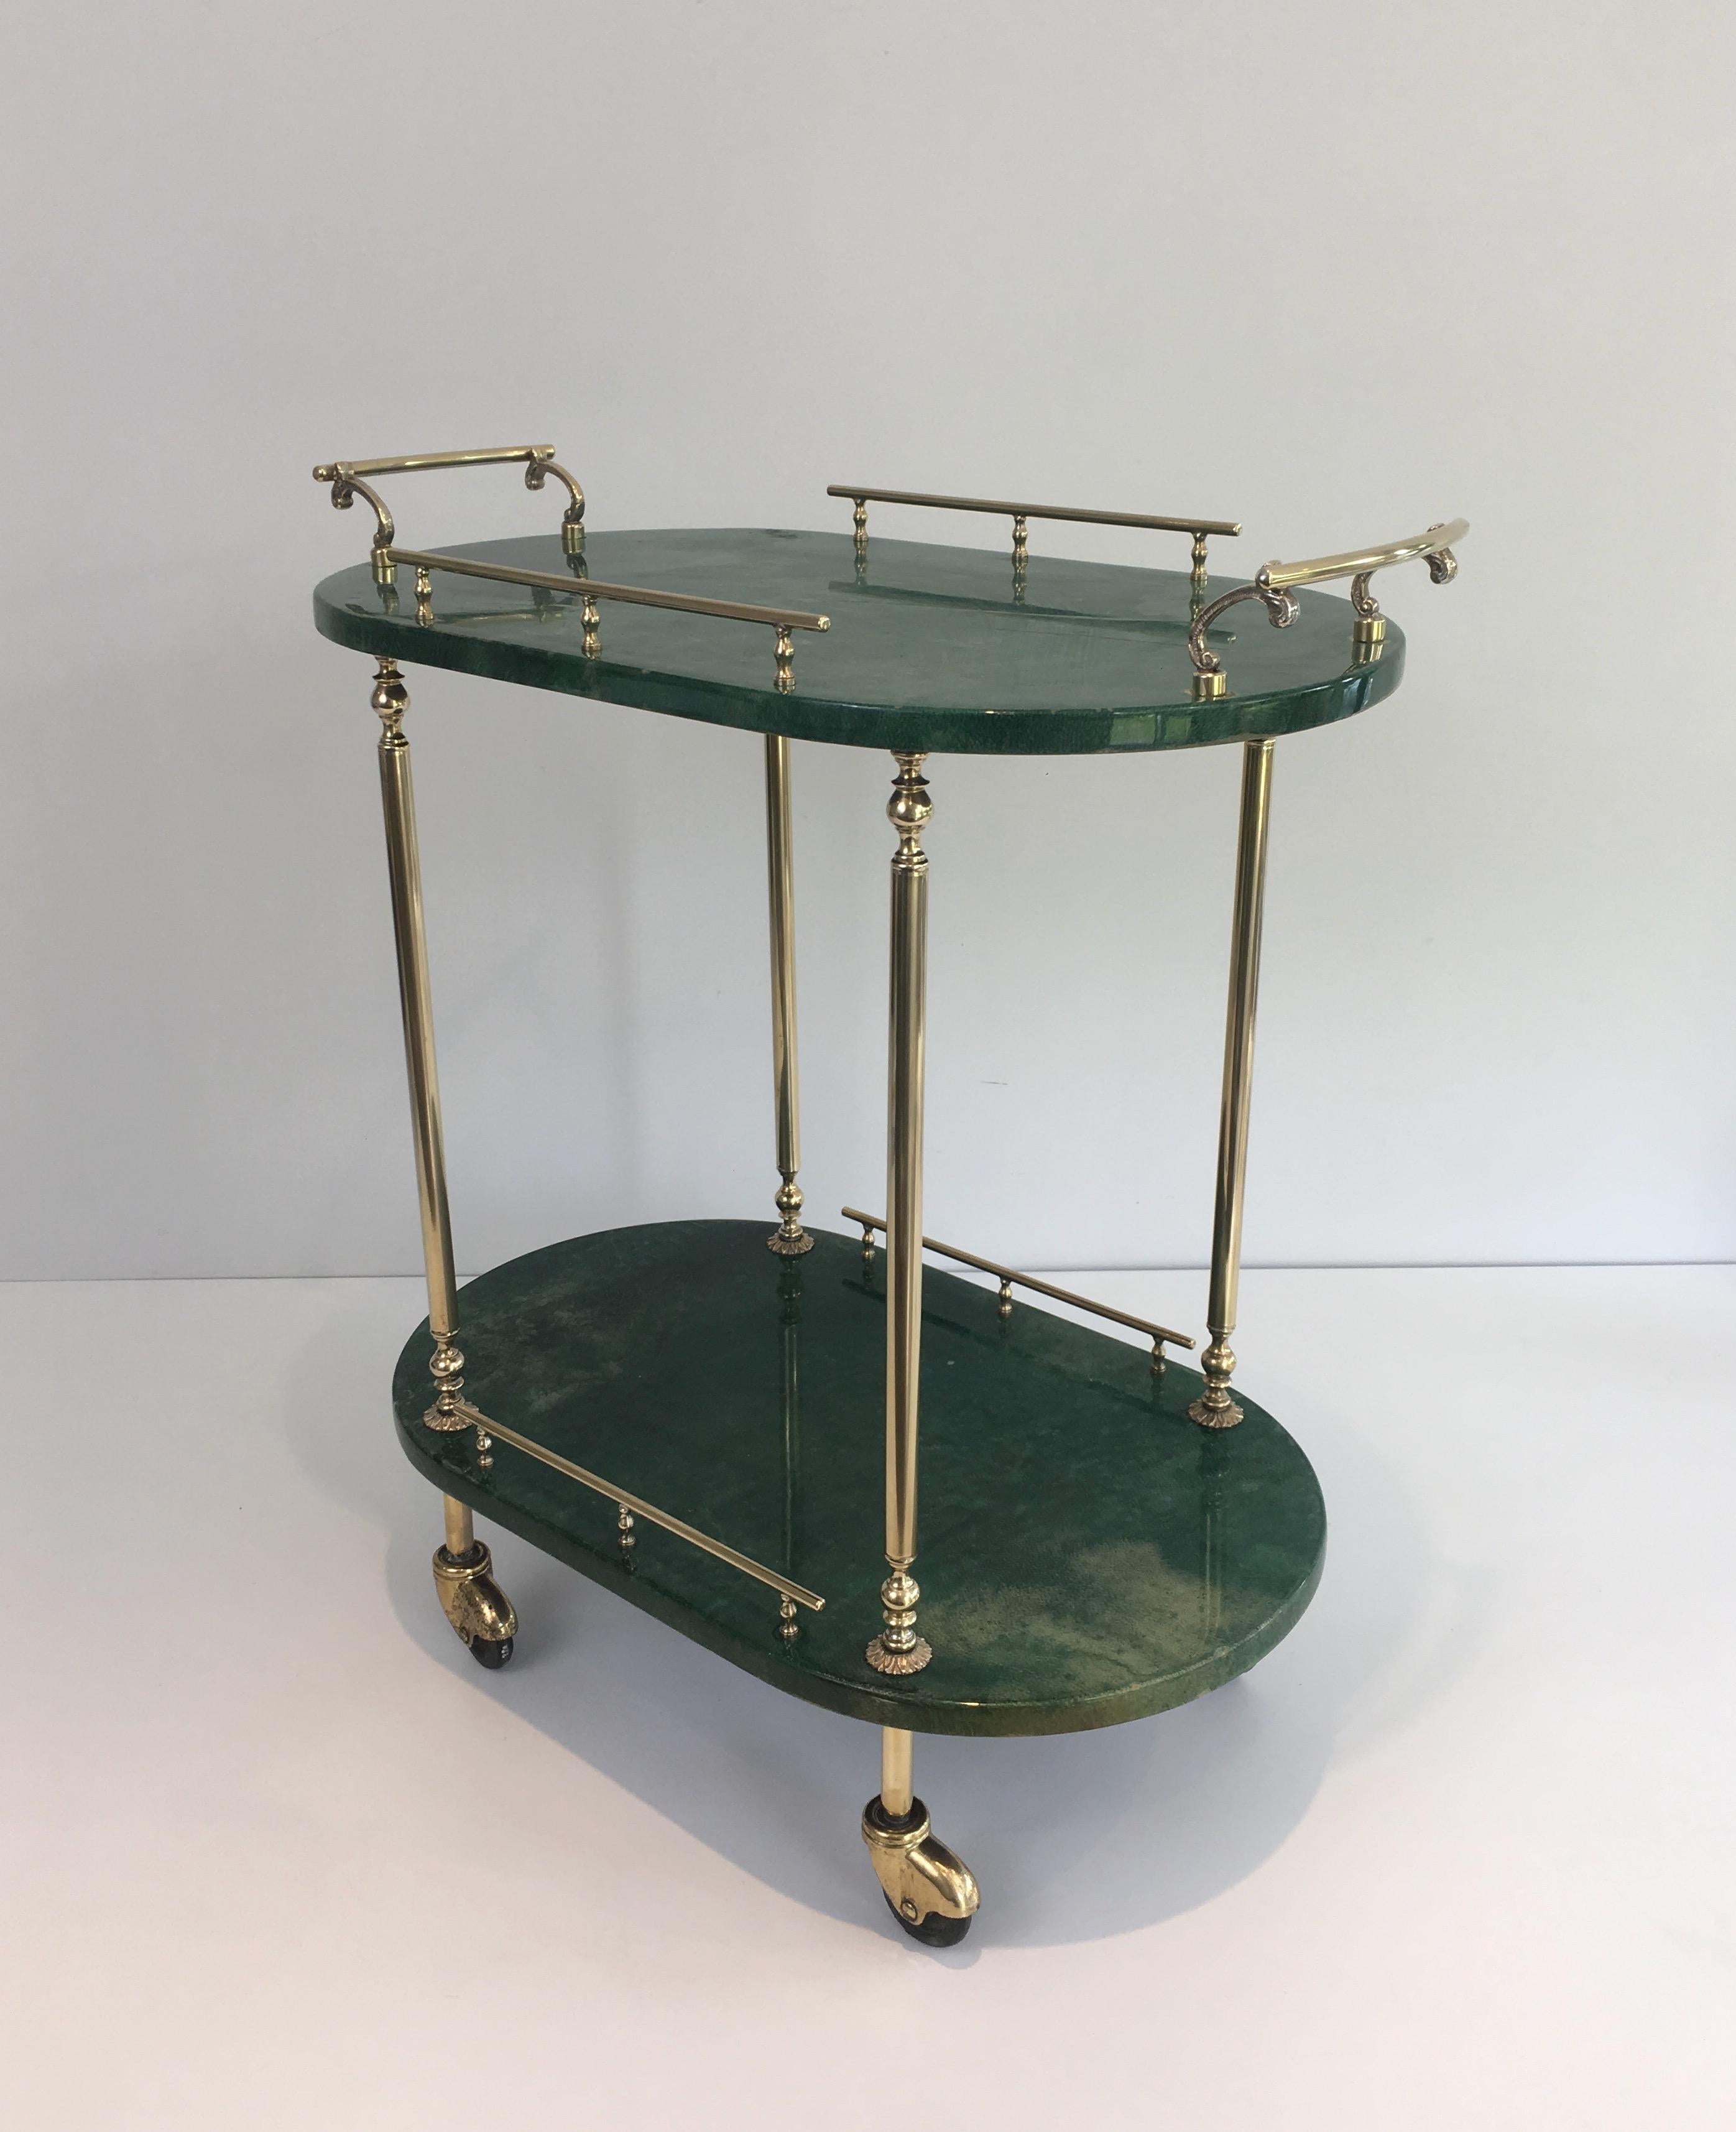 This very nice bar cart is made of goatskin and gilt metal. This is an Italian work by famous designer Aldo Tura, circa 1960.